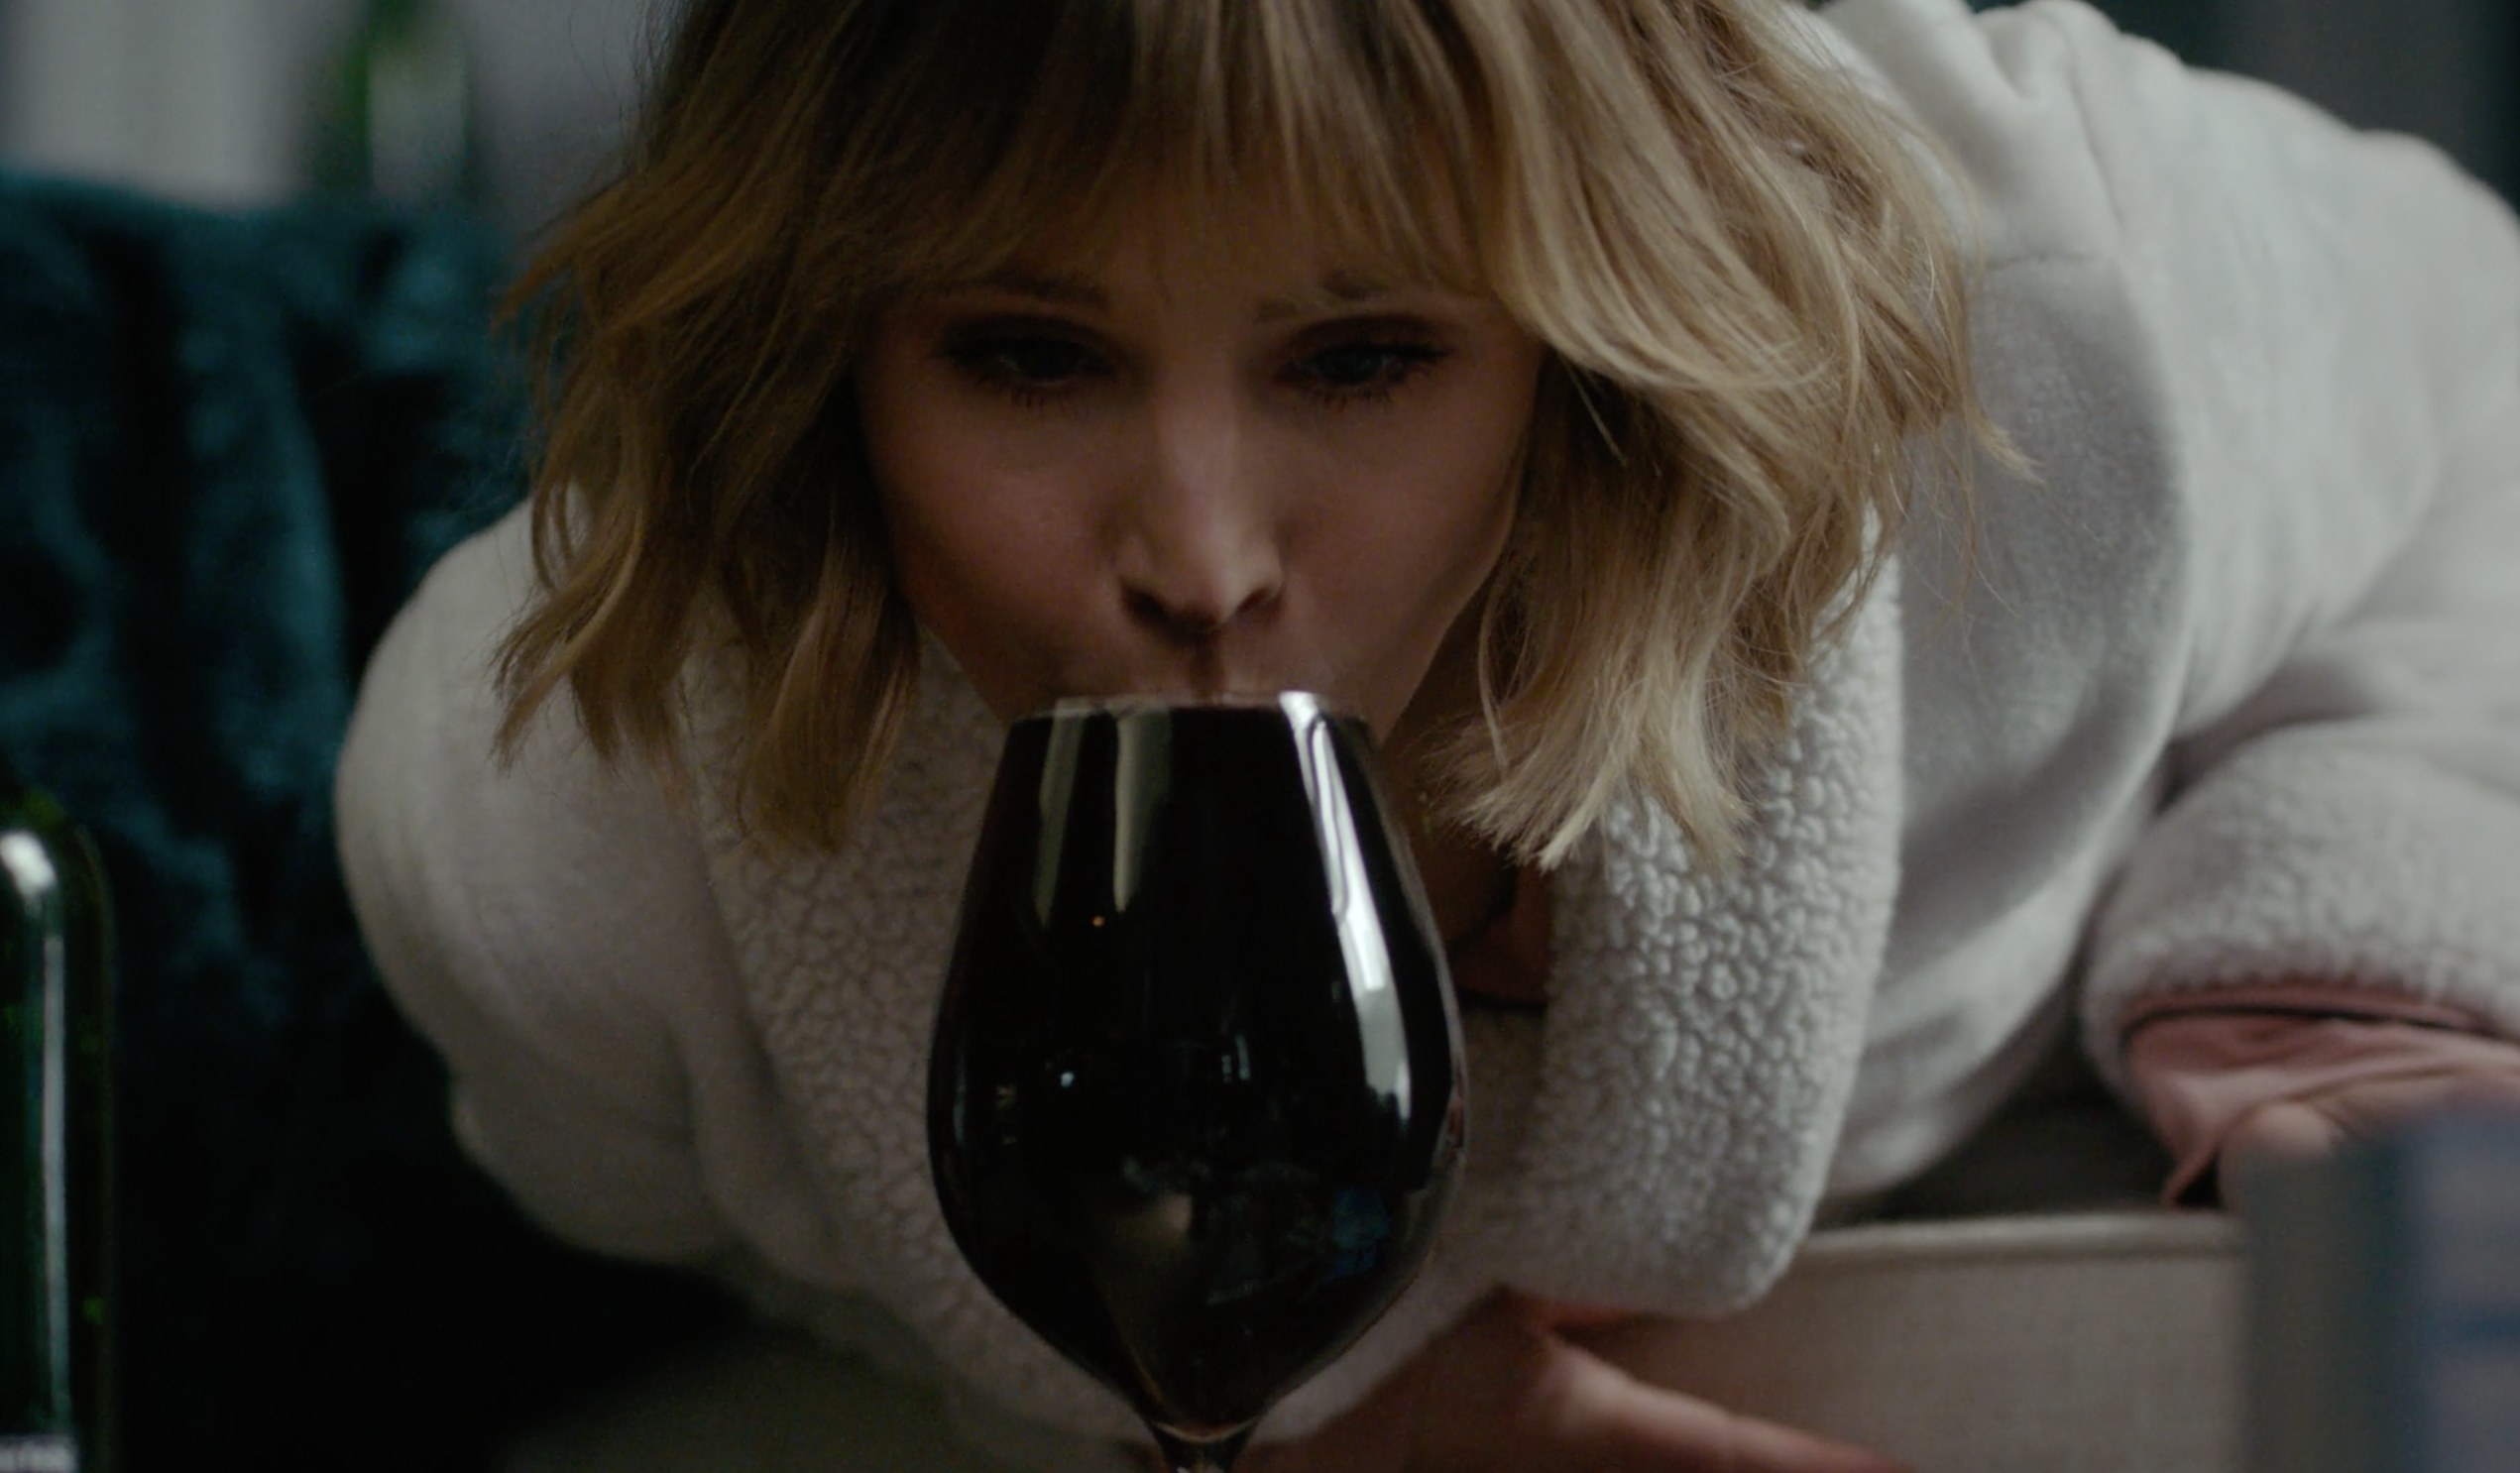 Kristen Bell in a bathrobe leaning down to slurp red wine from a glass filled to the brim